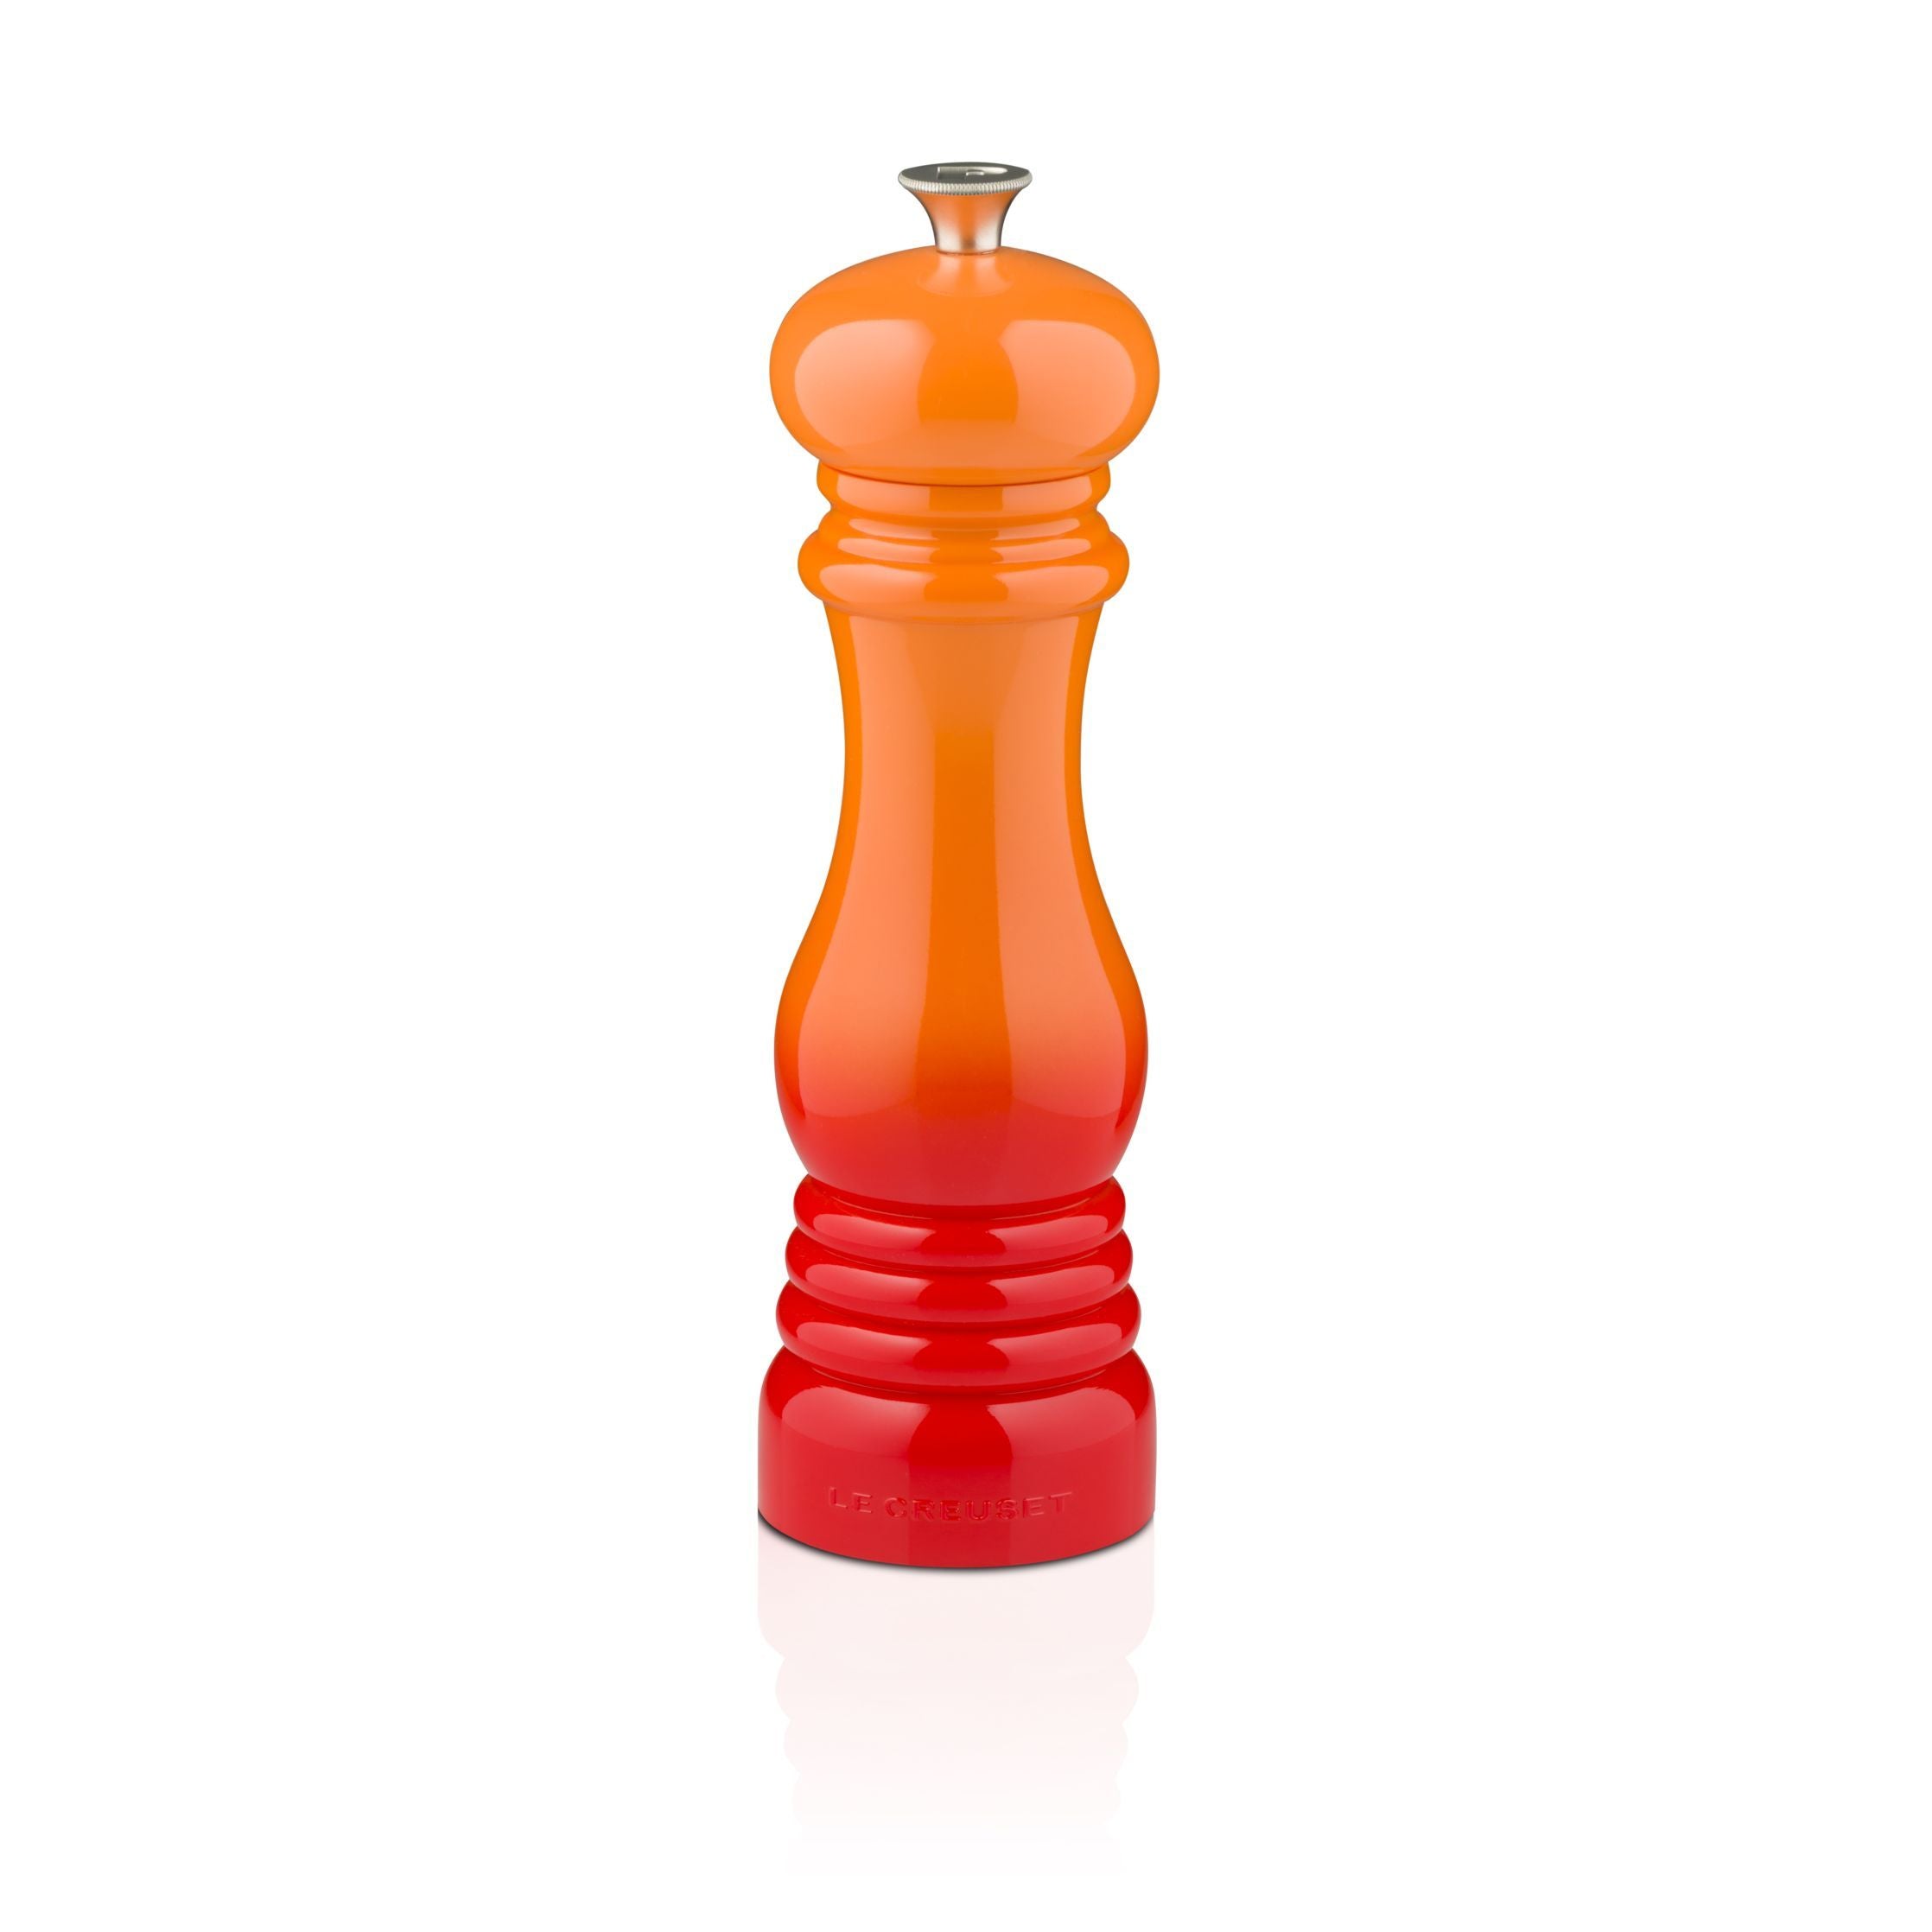 Le Creuset Pepper Mill 21 Cm, Oven Red